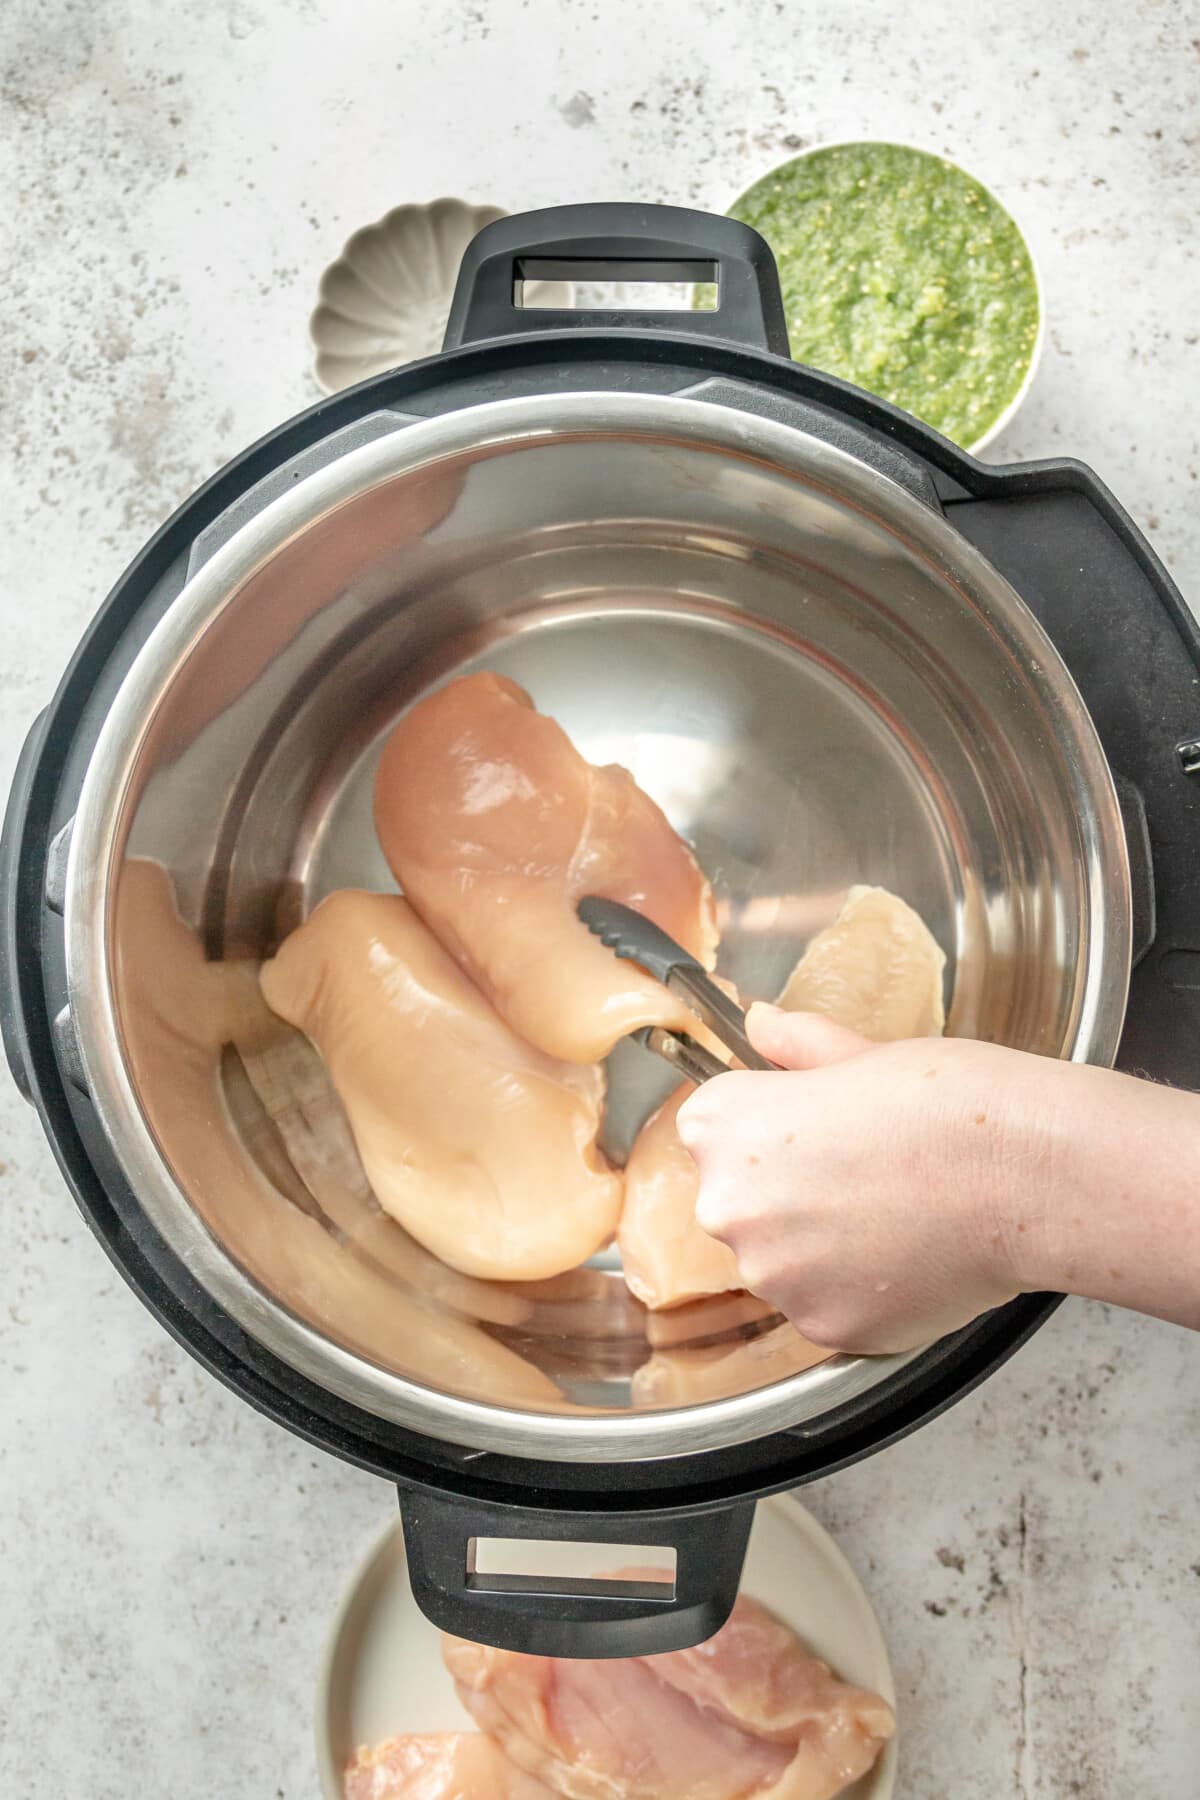 Chicken breasts are placed into an instant pot sitting on a light grey surface.